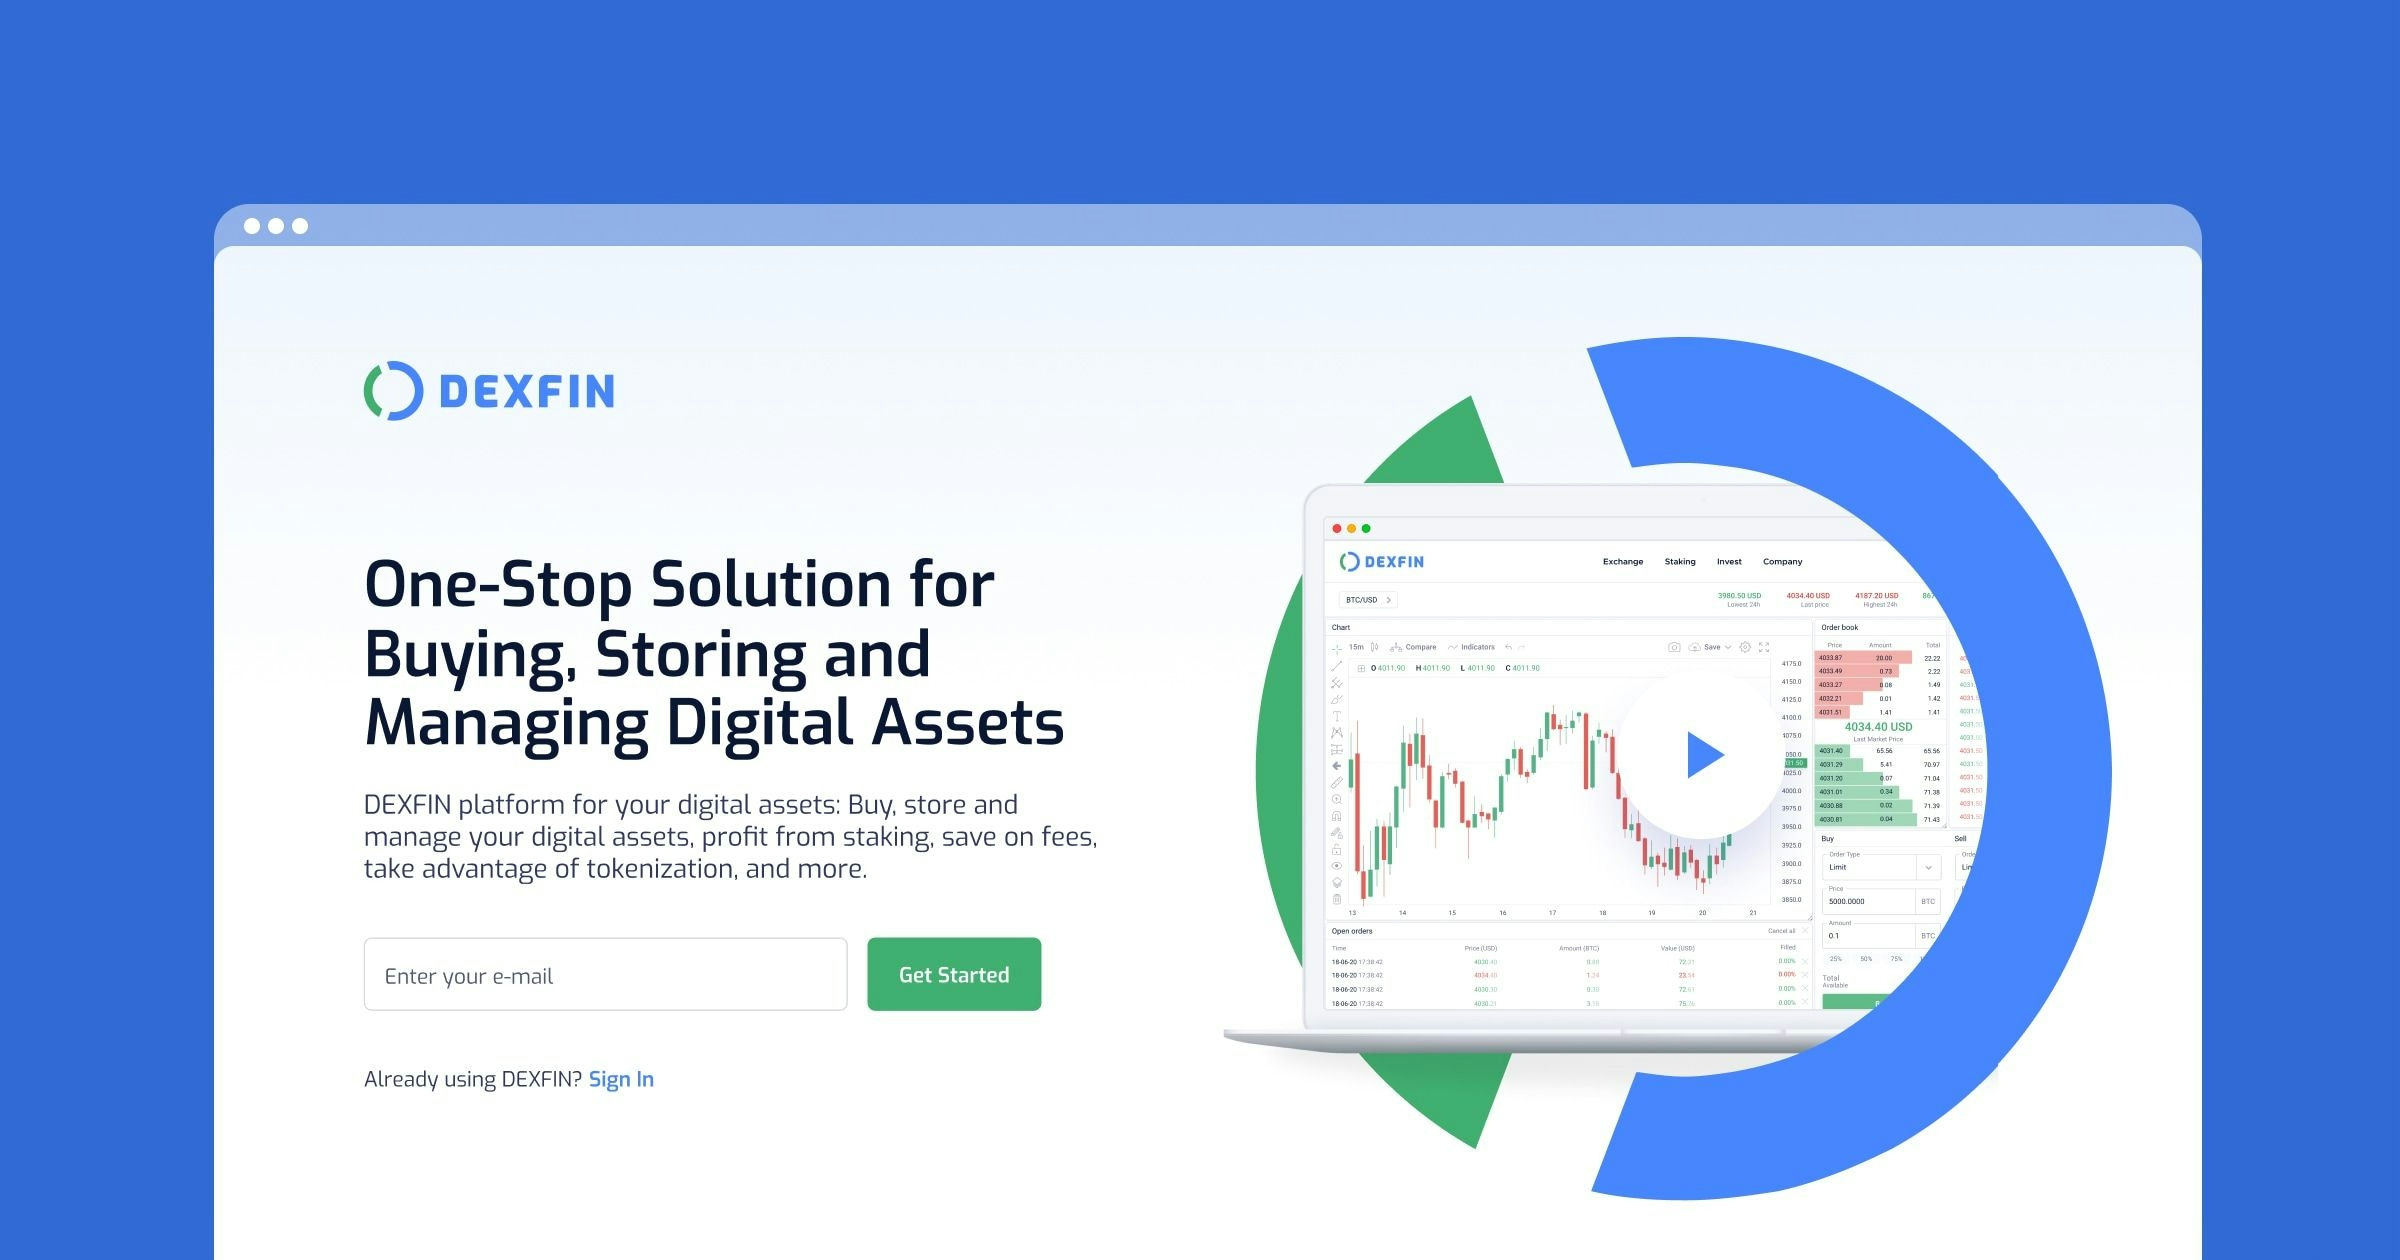 elevup launches DEXFIN’s web-based platform for digital assets trading and management 